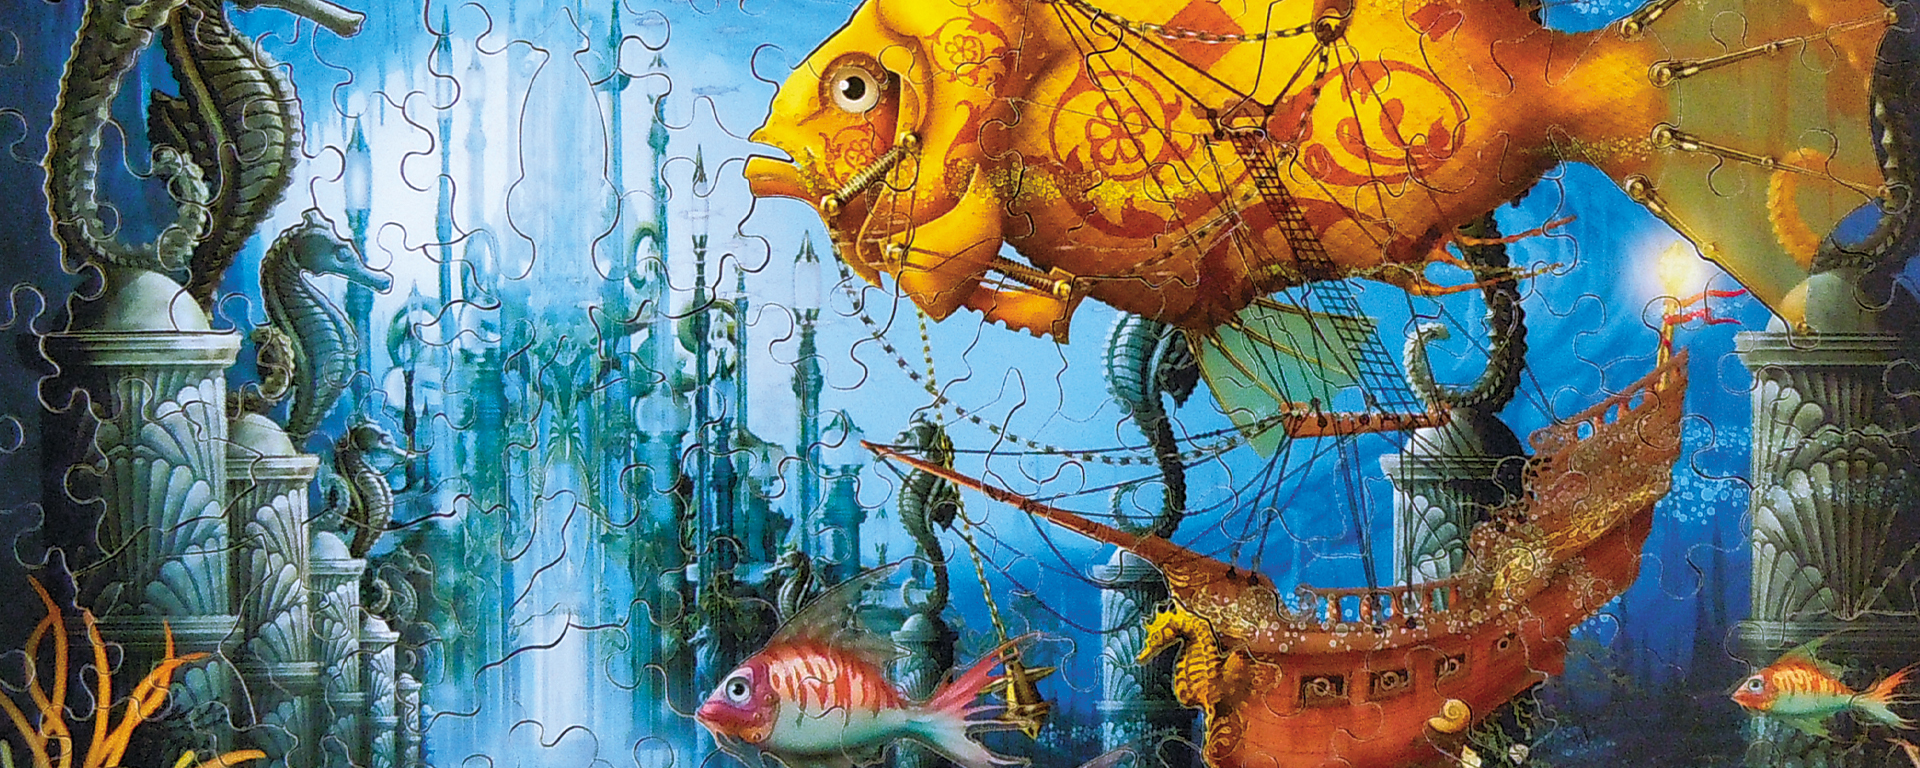 Wooden whimsical and fantasy puzzle featuring Armada #2 by Ciro Marchetti. An art piece depicting a pirate ship with a big yellow fish as the sails in an underwater kingdom.